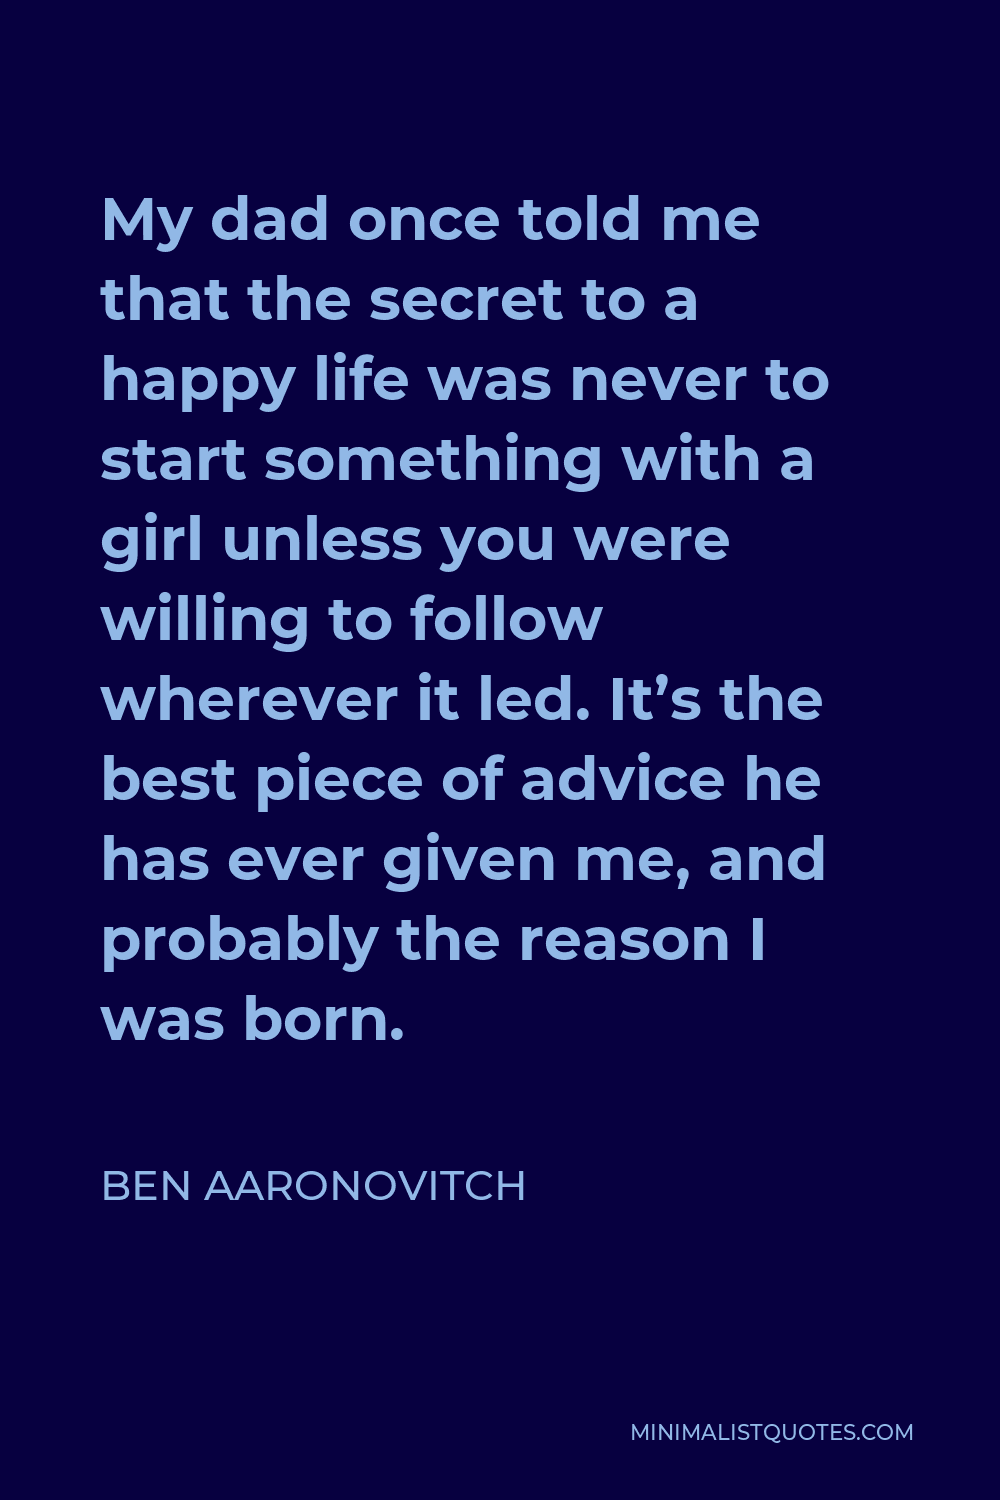 Ben Aaronovitch Quote - My dad once told me that the secret to a happy life was never to start something with a girl unless you were willing to follow wherever it led. It’s the best piece of advice he has ever given me, and probably the reason I was born.